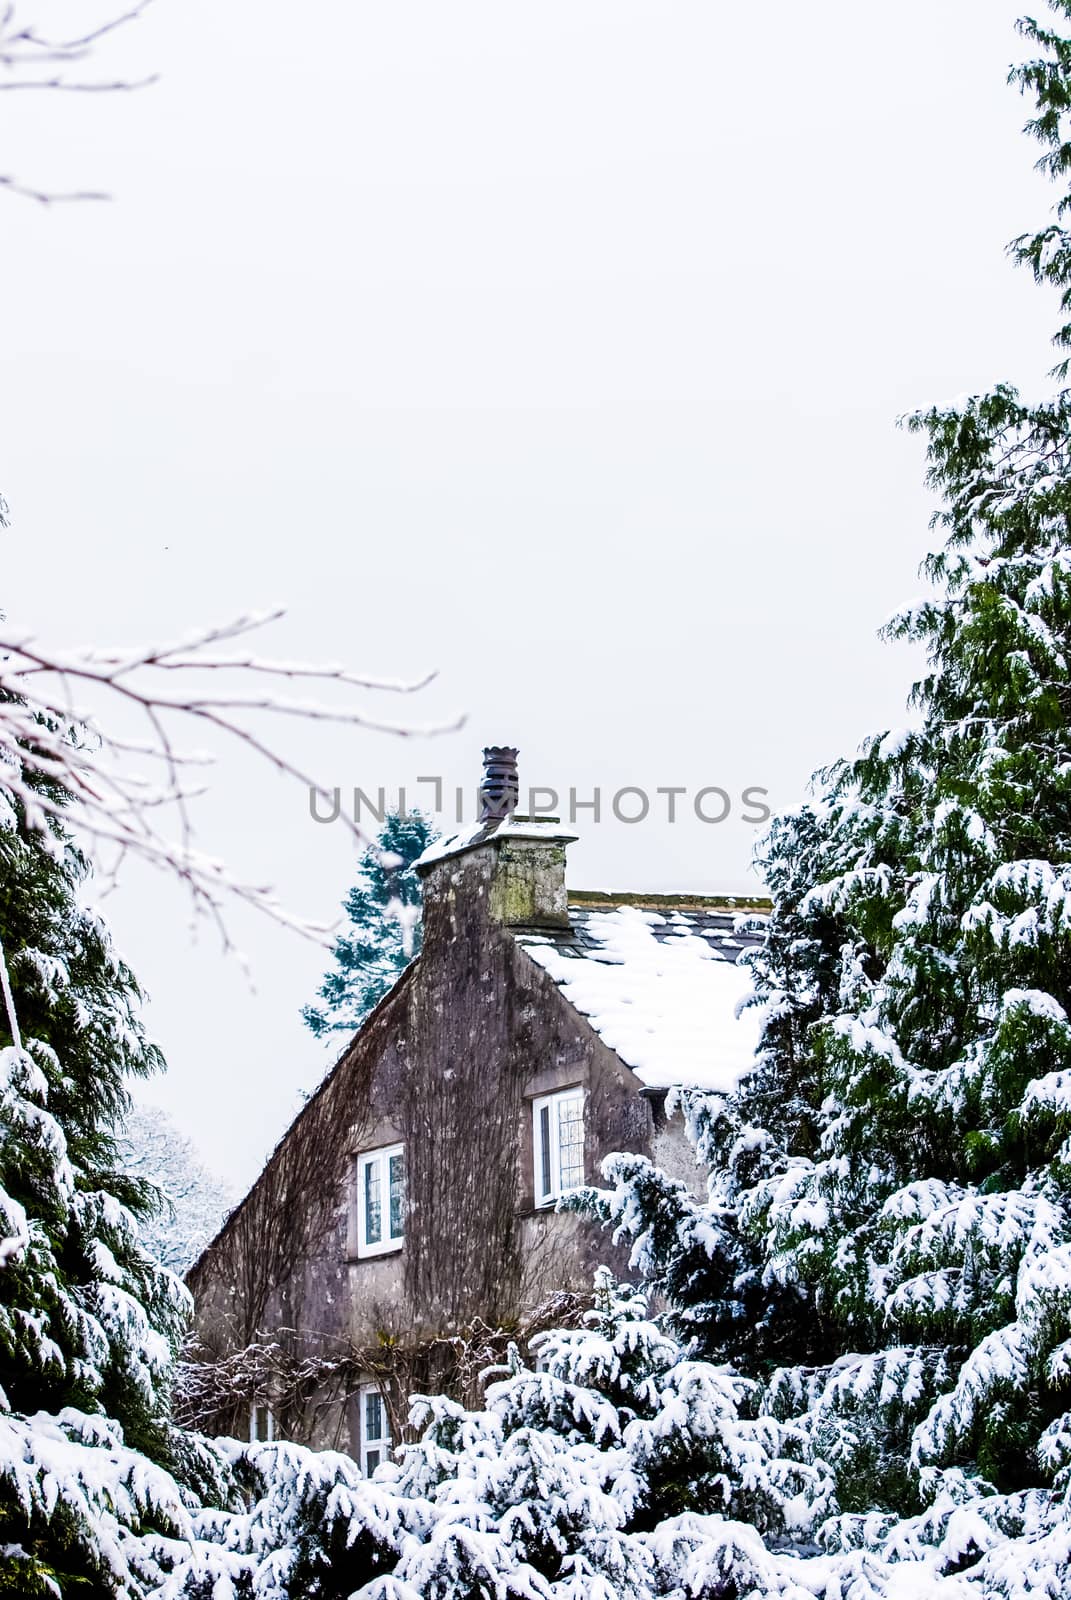 House in a snowy forest In Lake District Cumbria